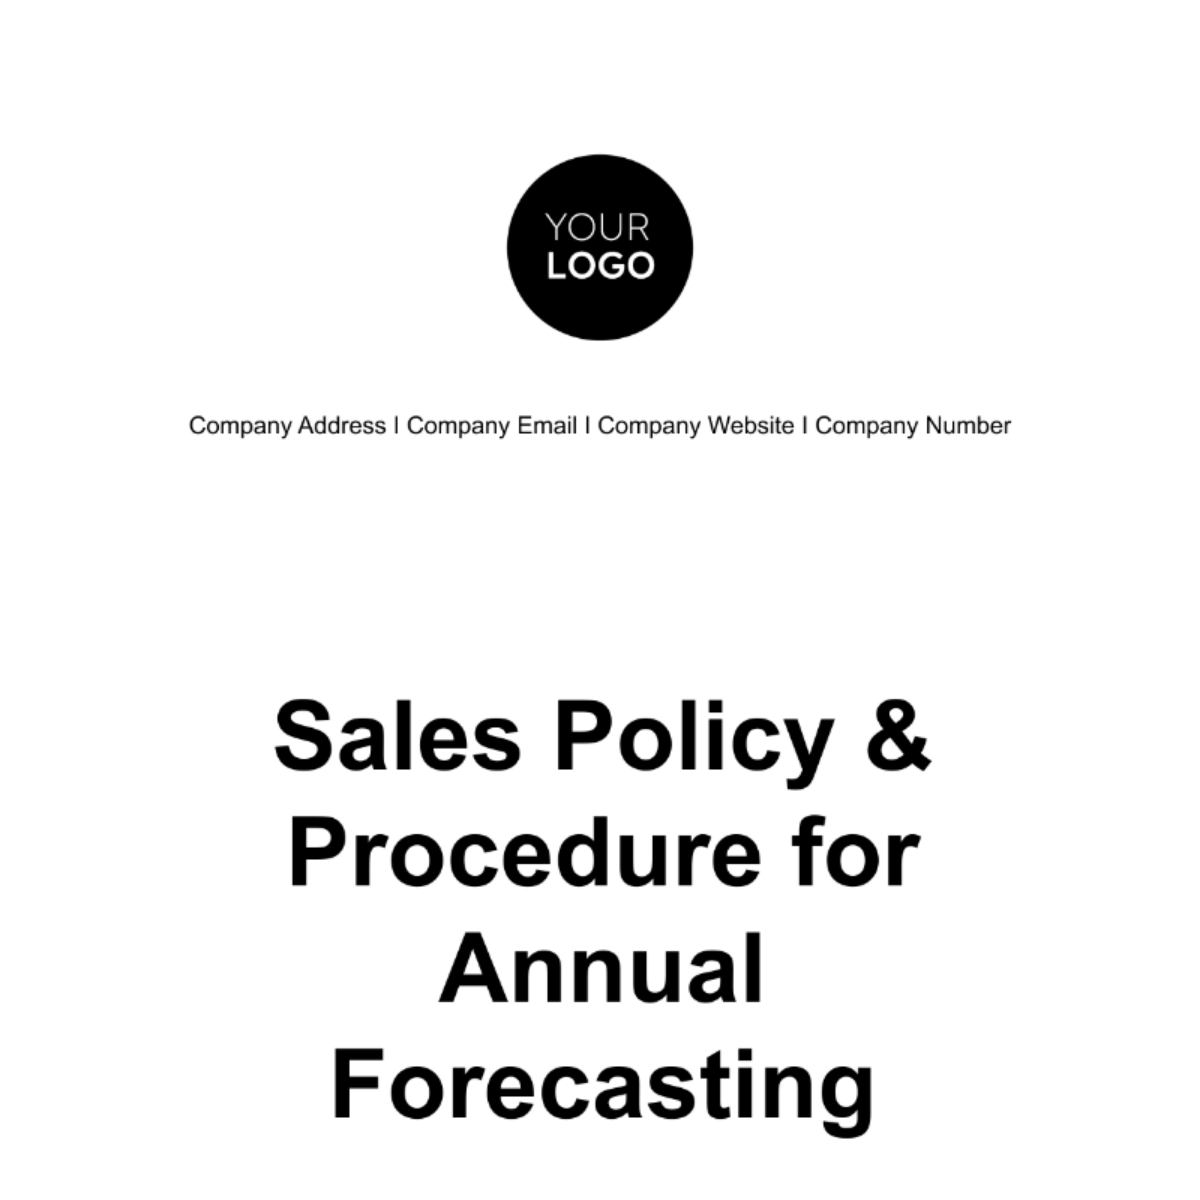 Free Sales Policy & Procedure for Annual Forecasting Template